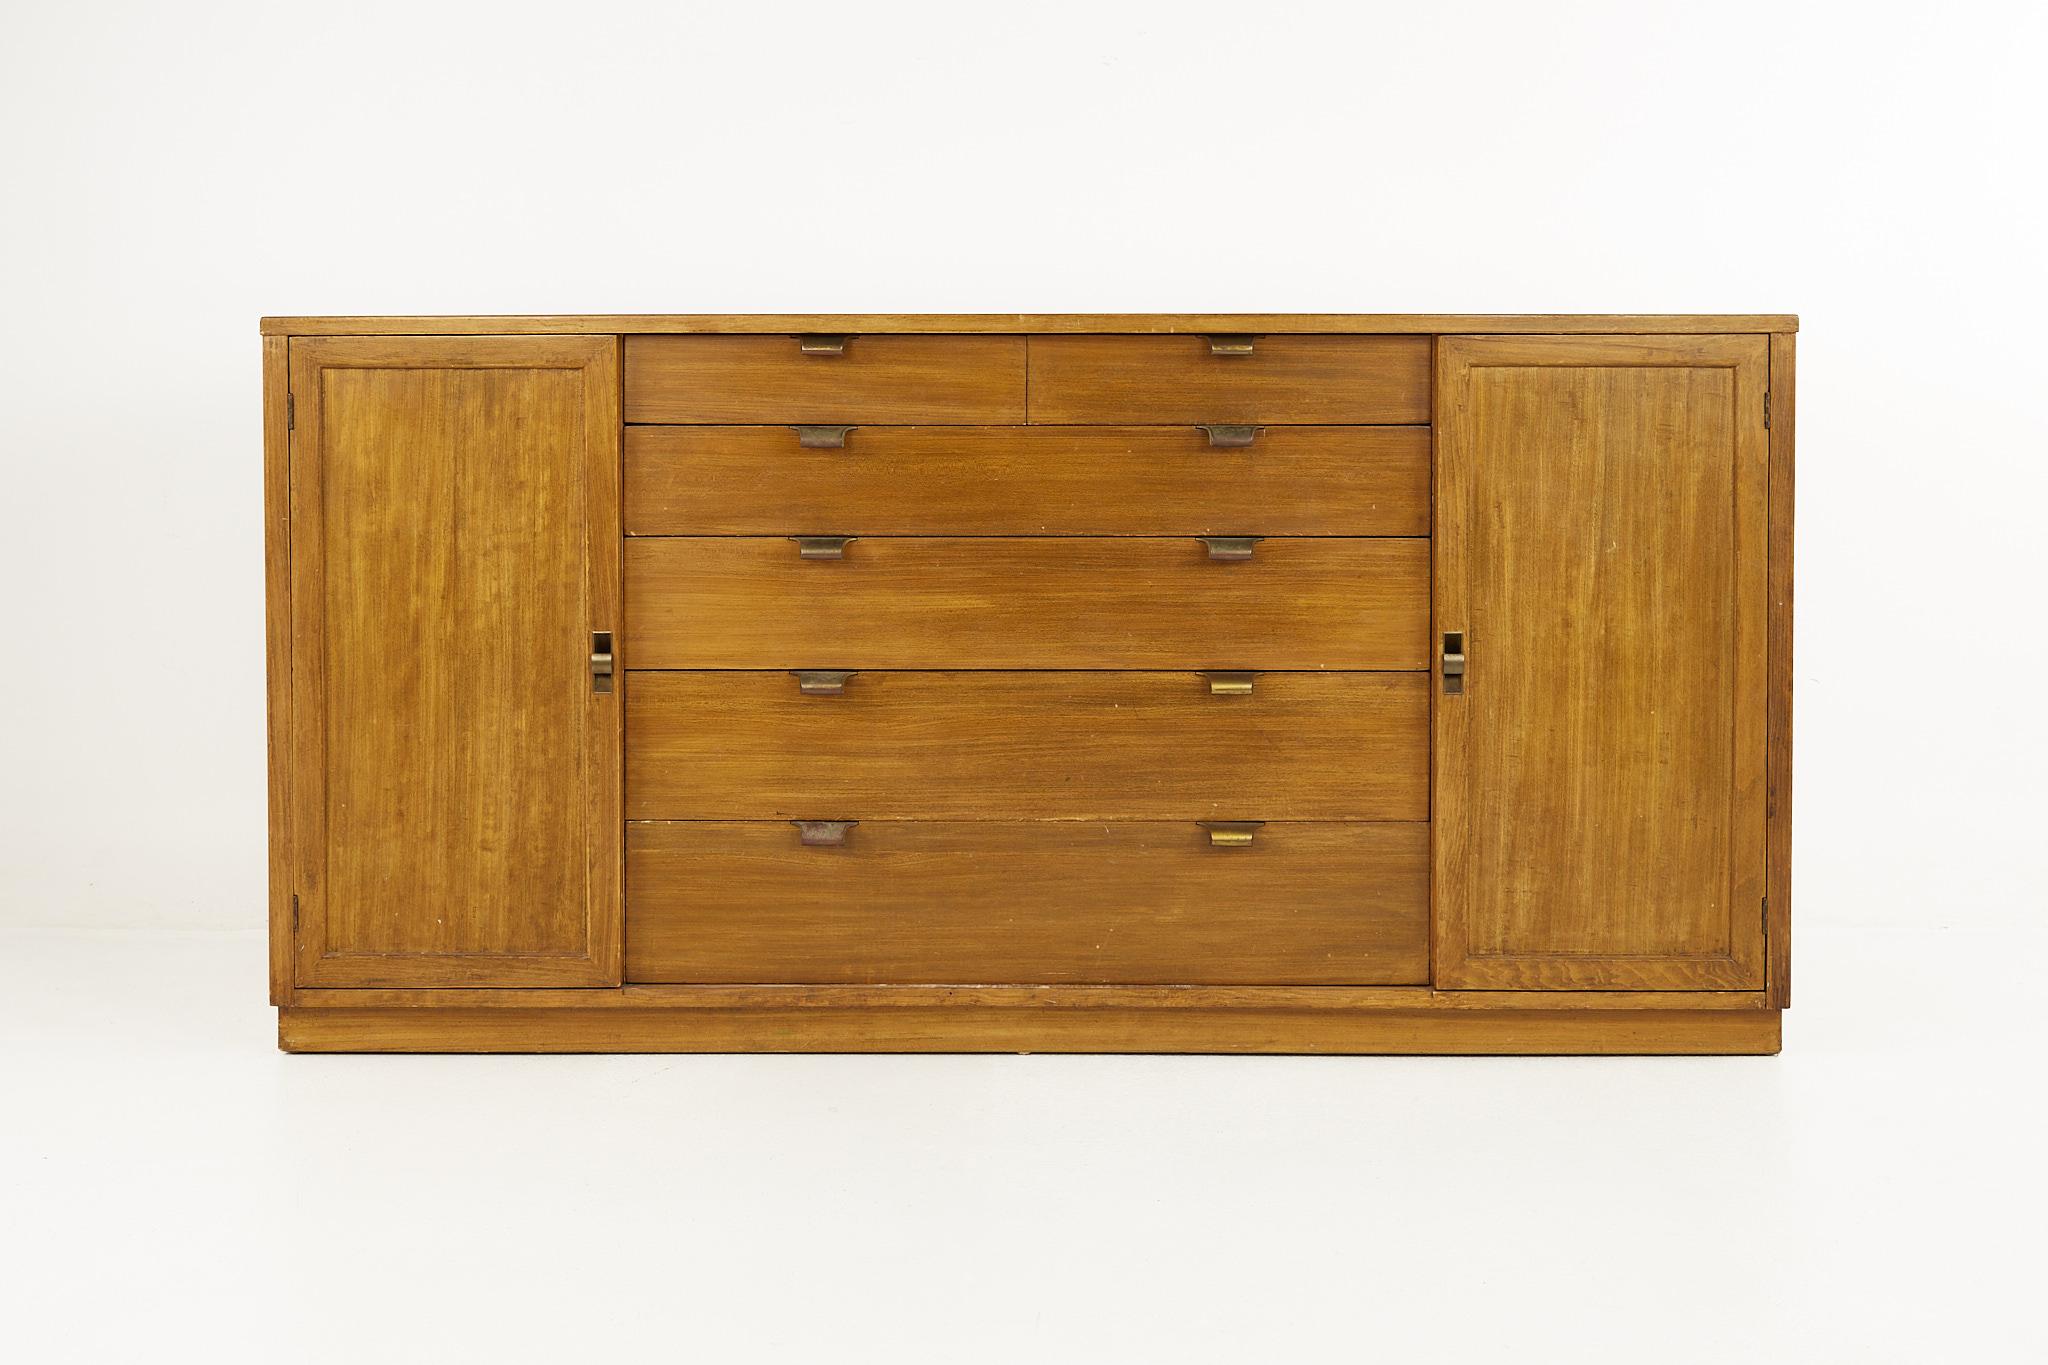 Edward Wormley for Drexel precedent mid century brass and elm credenza

Credenza measures: 66.75 wide x 20 deep x 32.75 inches high

All pieces of furniture can be had in what we call restored vintage condition. That means the piece is restored